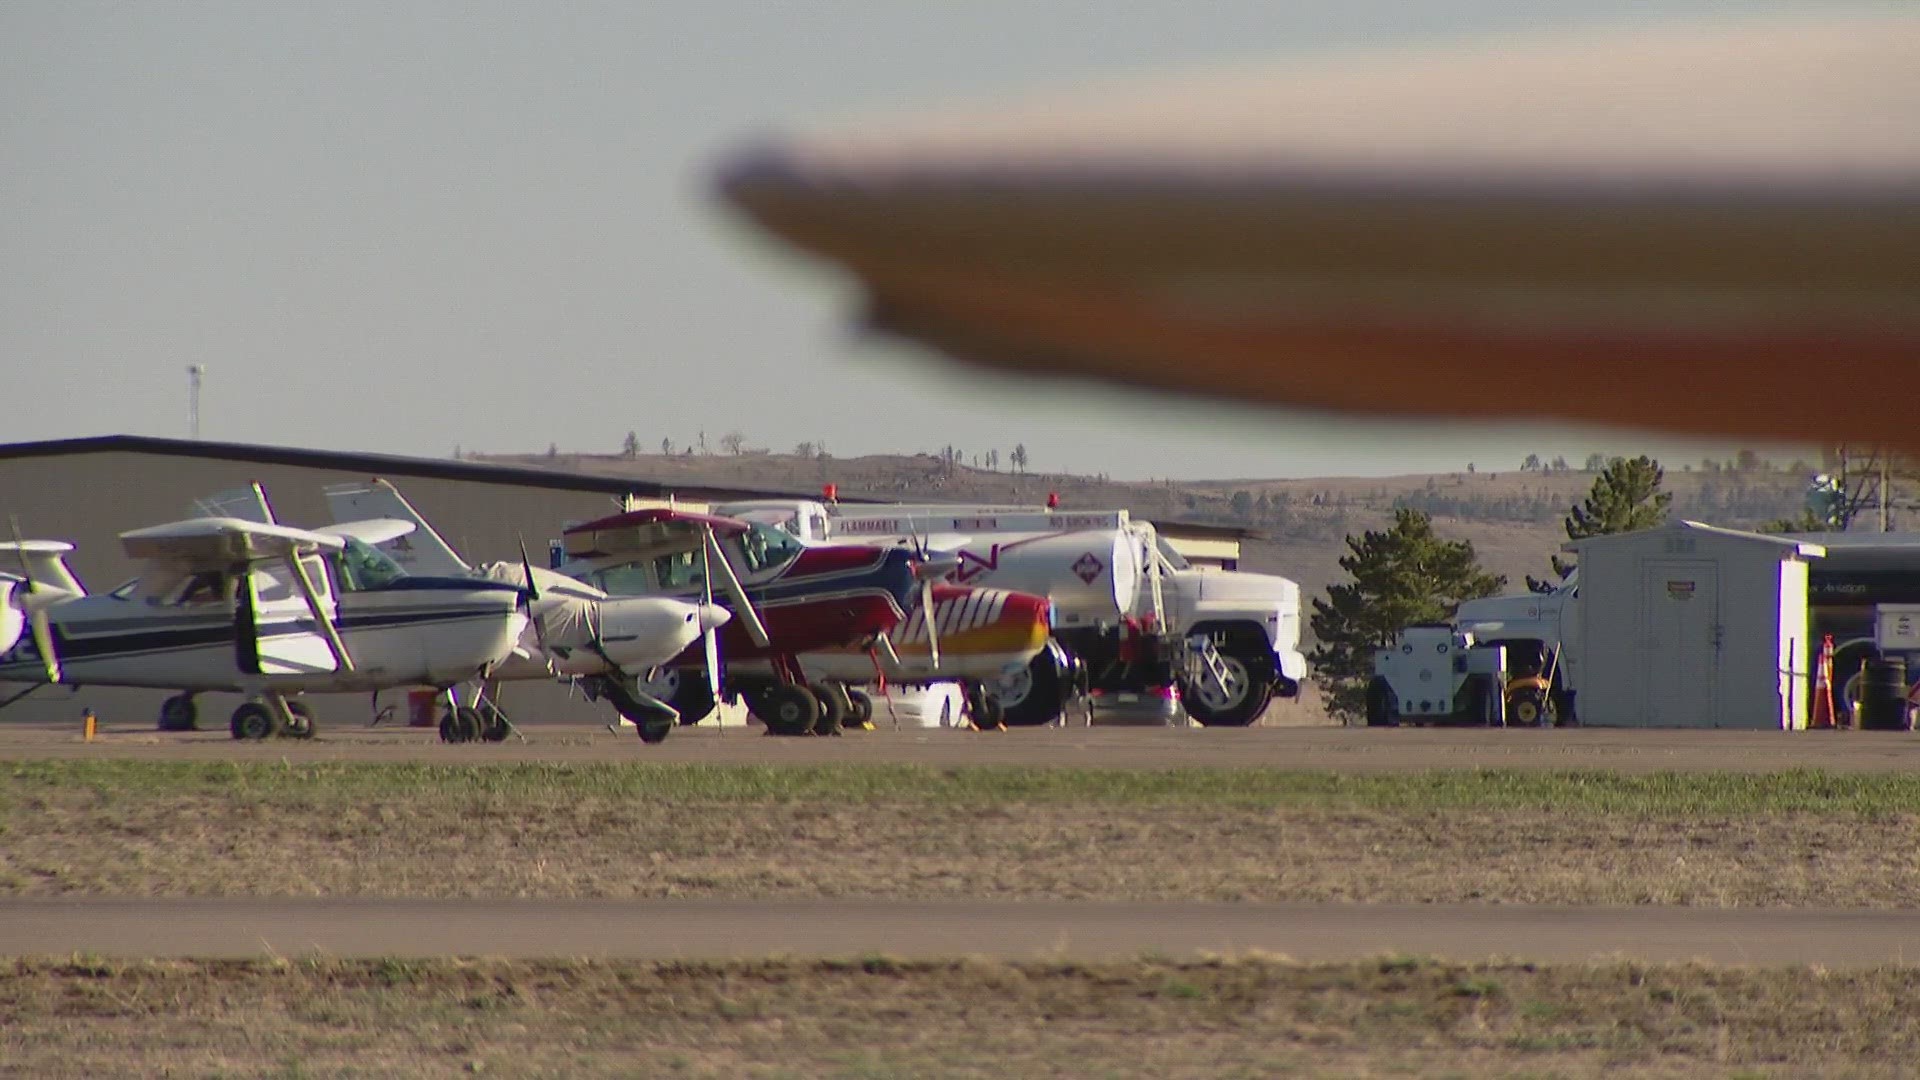 According to the city, the airport is due for a new Airport Master Plan, which is a process that is guided by the FAA.